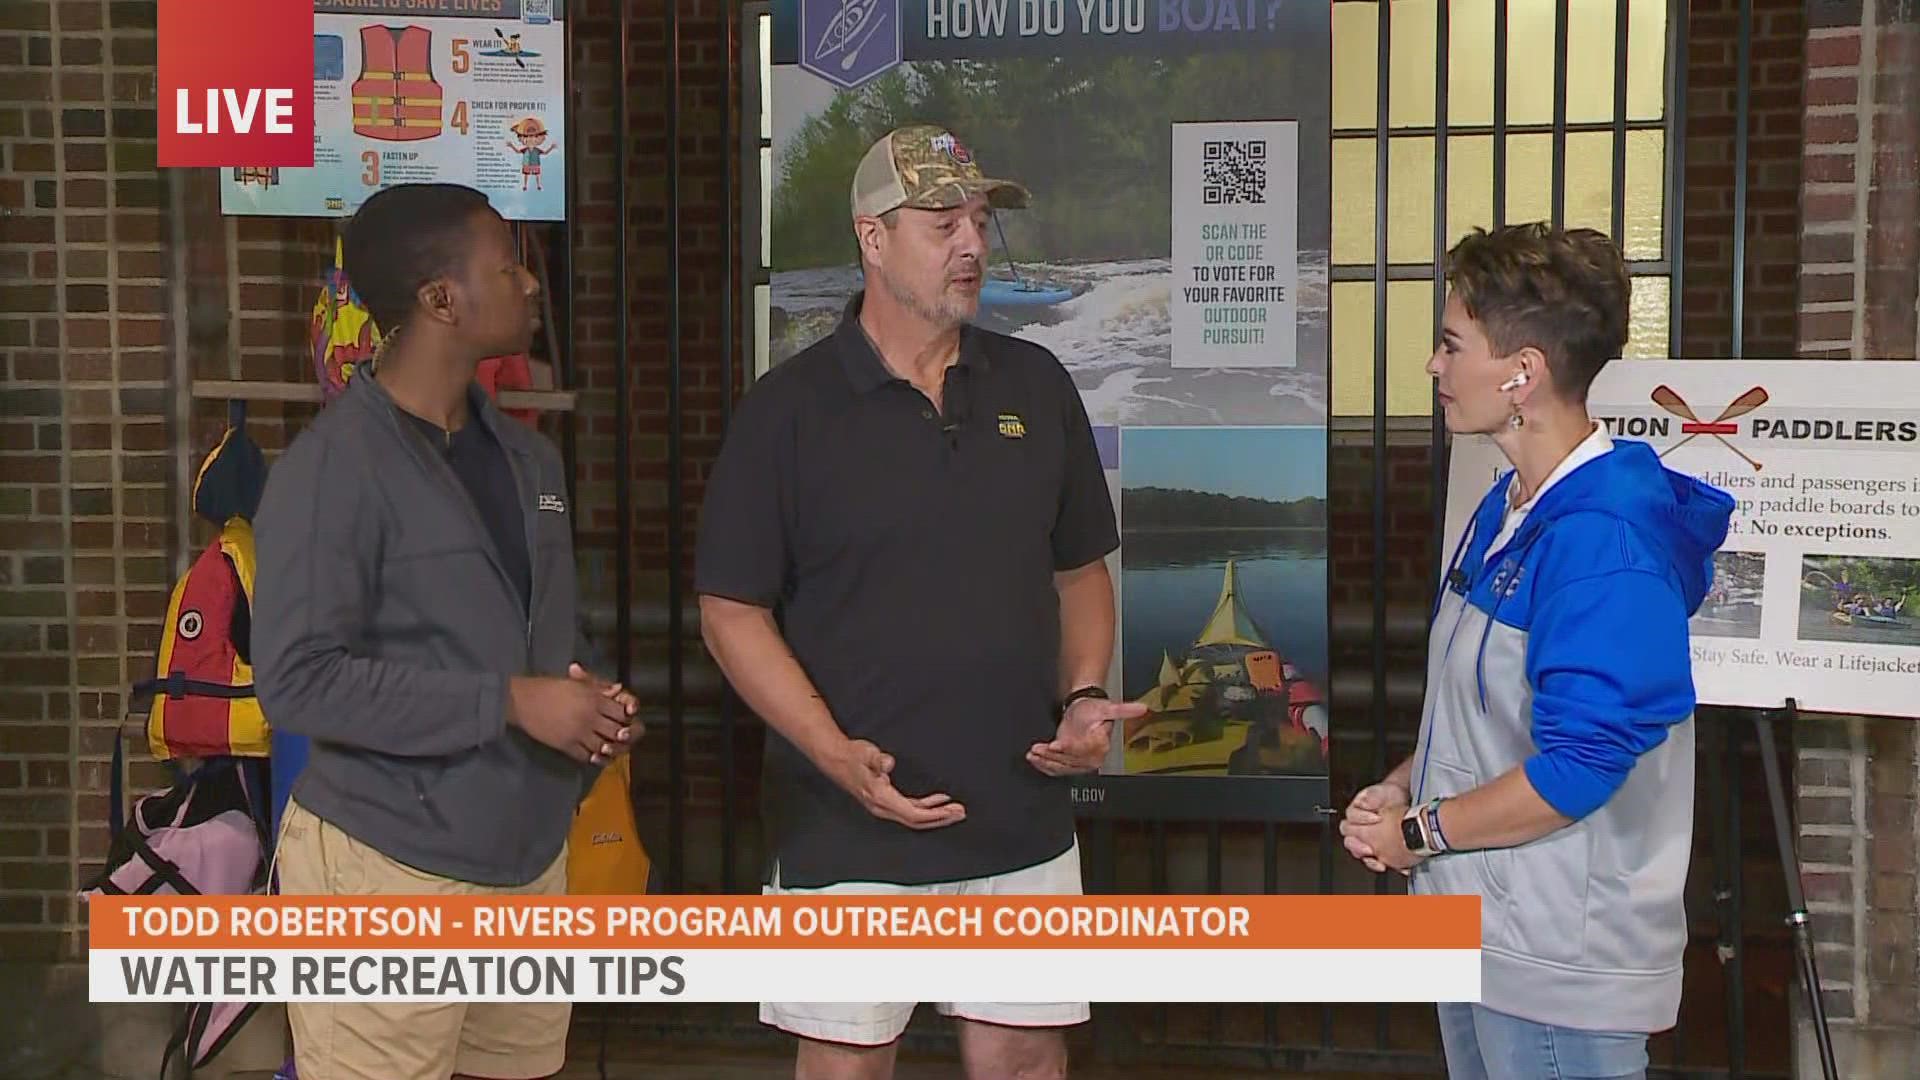 Tom Robertson, rivers program outreach coordinator for Iowa DNR, speaks to the "Good Morning Iowa" team about the importance of water safety.